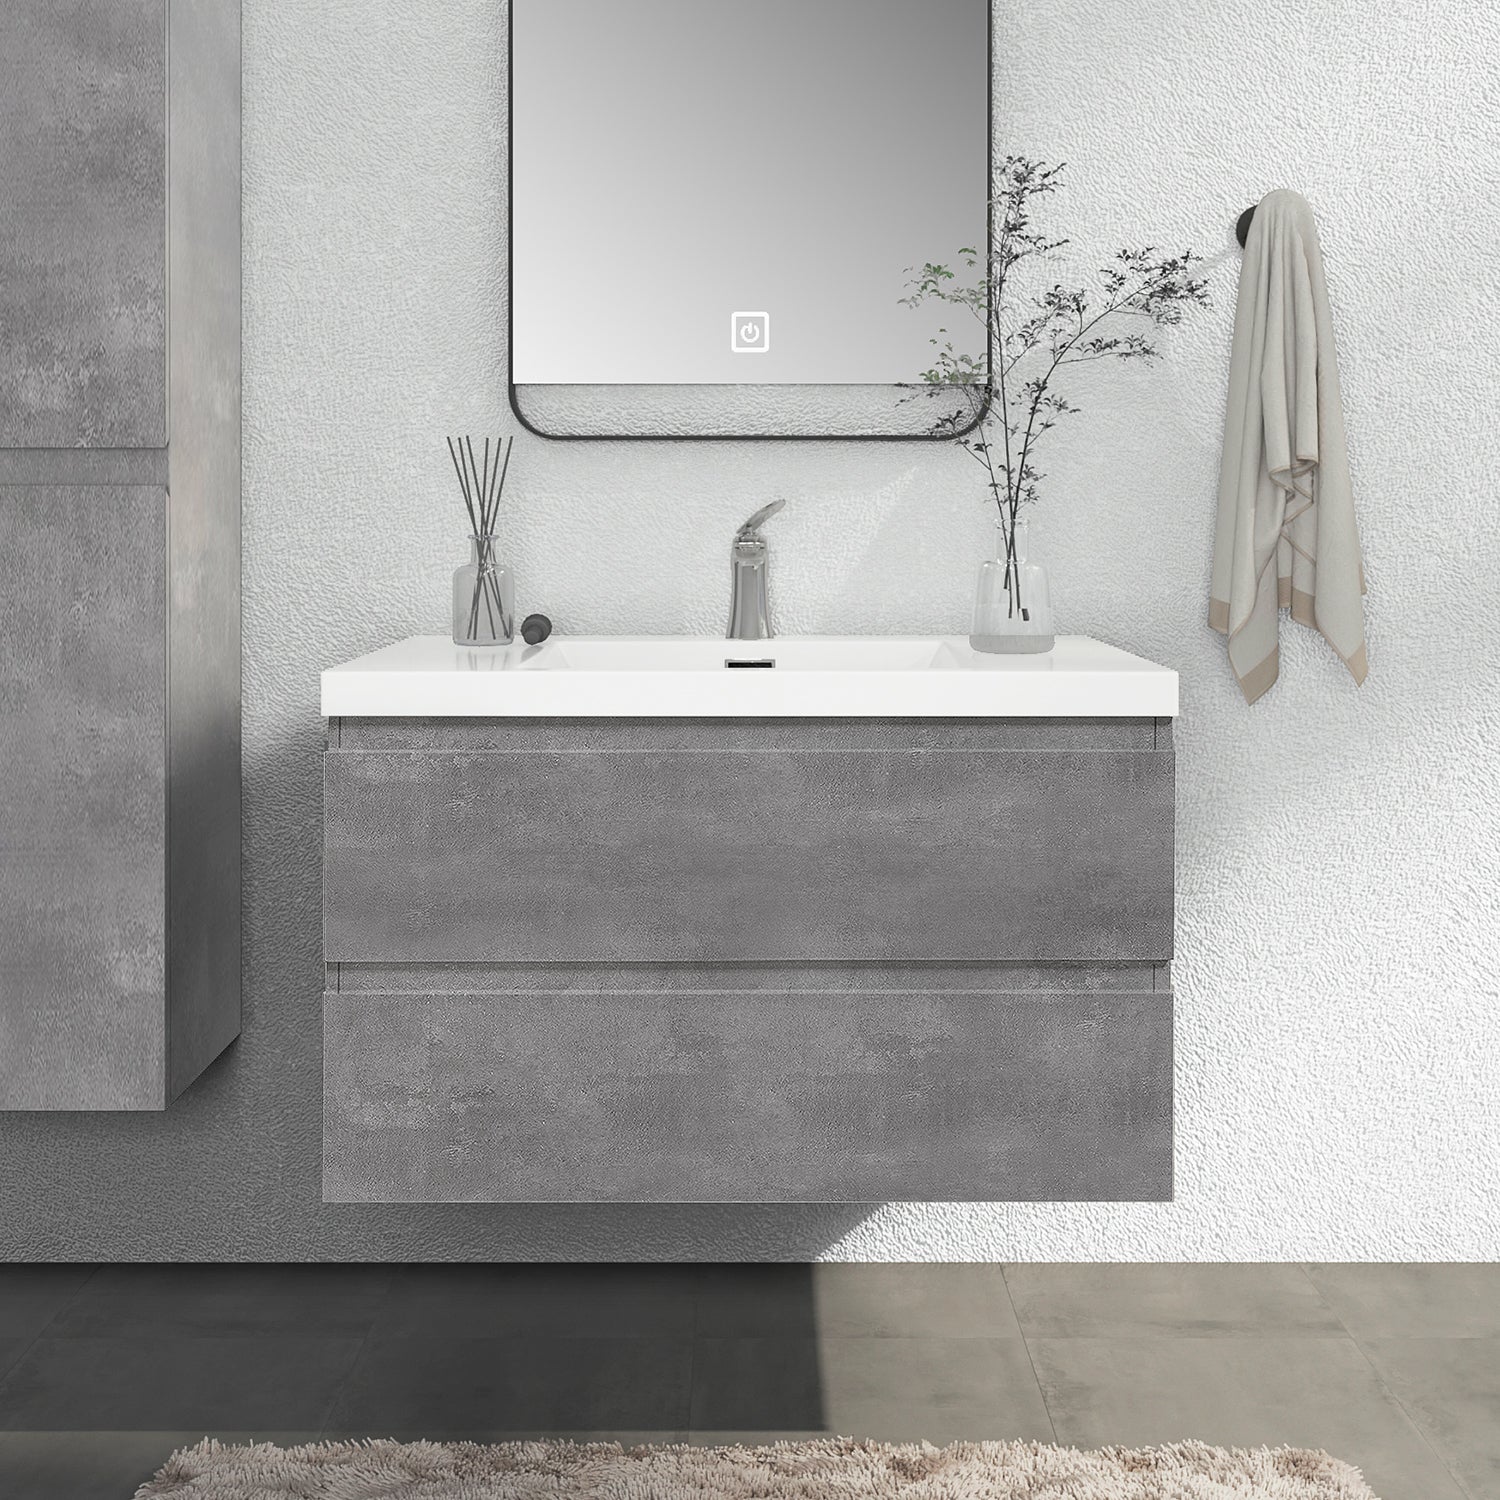 Sinber 36" Wall Mounted Single Rectangular Sink Bathroom Vanity Cabinet with White Acrylic Countertop 2 Drawers, Compact and Elegant with Sleek Design for Modern Bathrooms